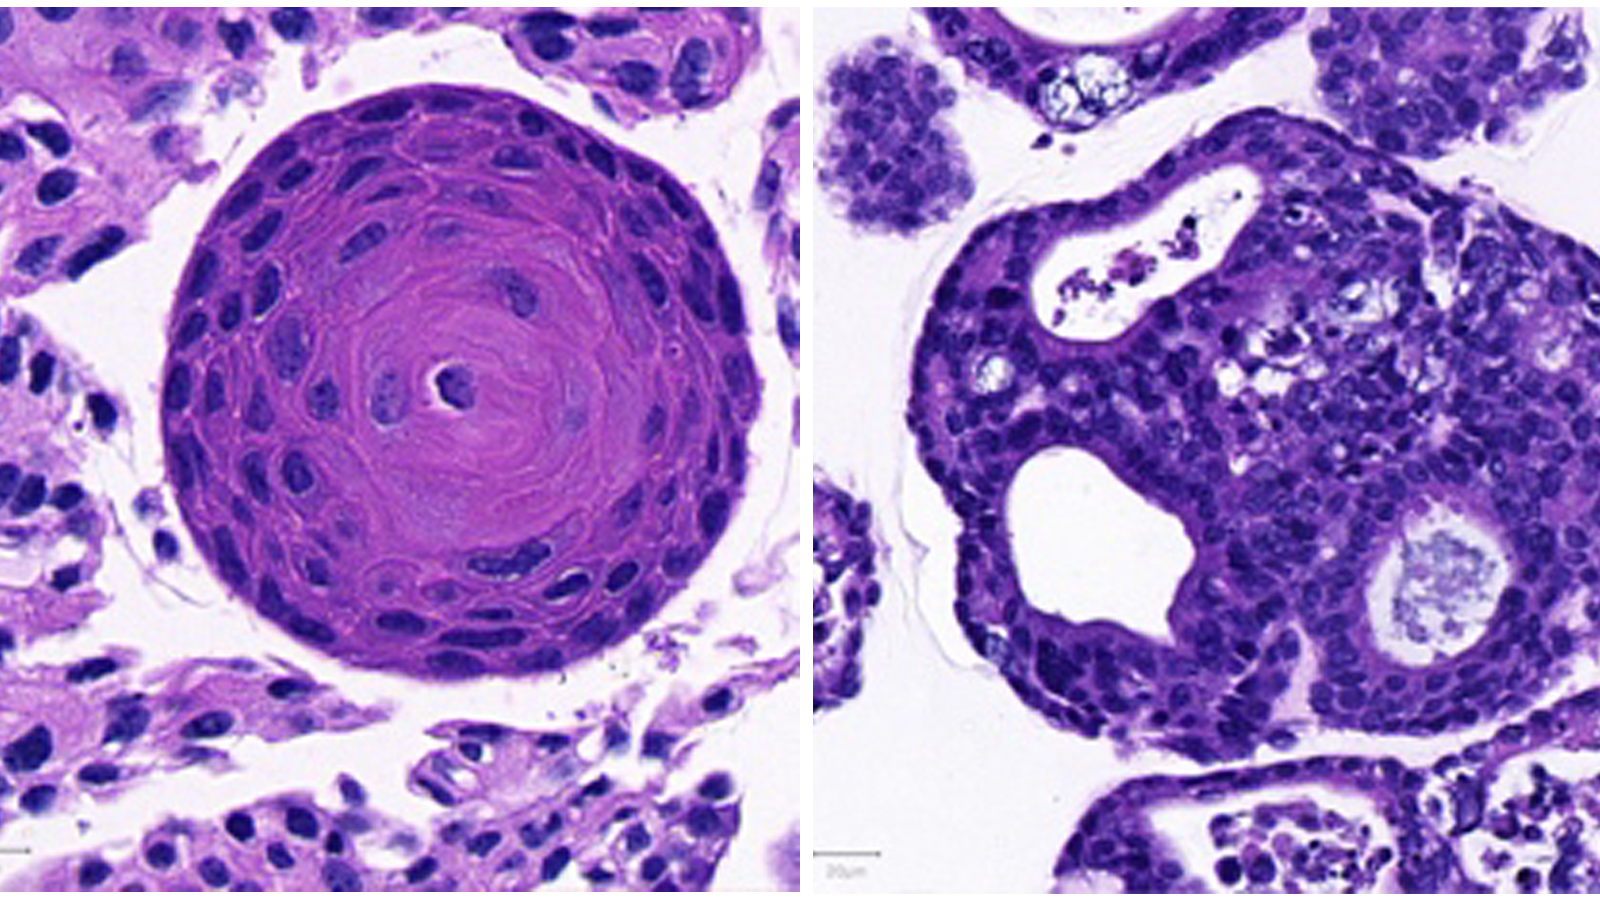 Normal and malignant esophageal Organoids